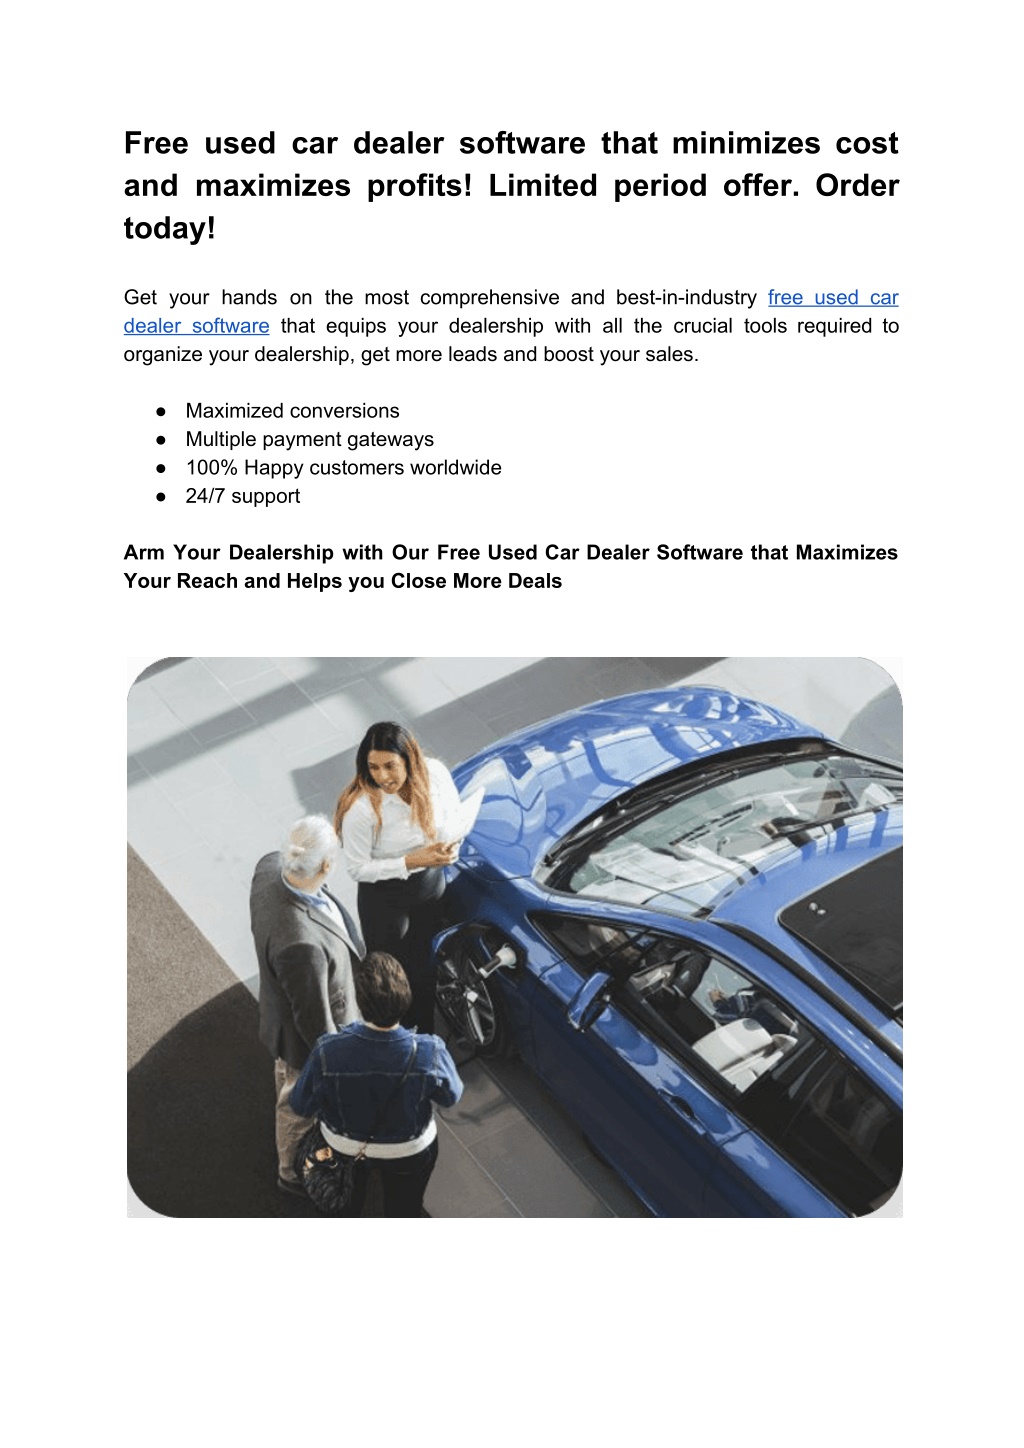 PPT Free Used Car Dealer Software PowerPoint Presentation, free download ID9883512